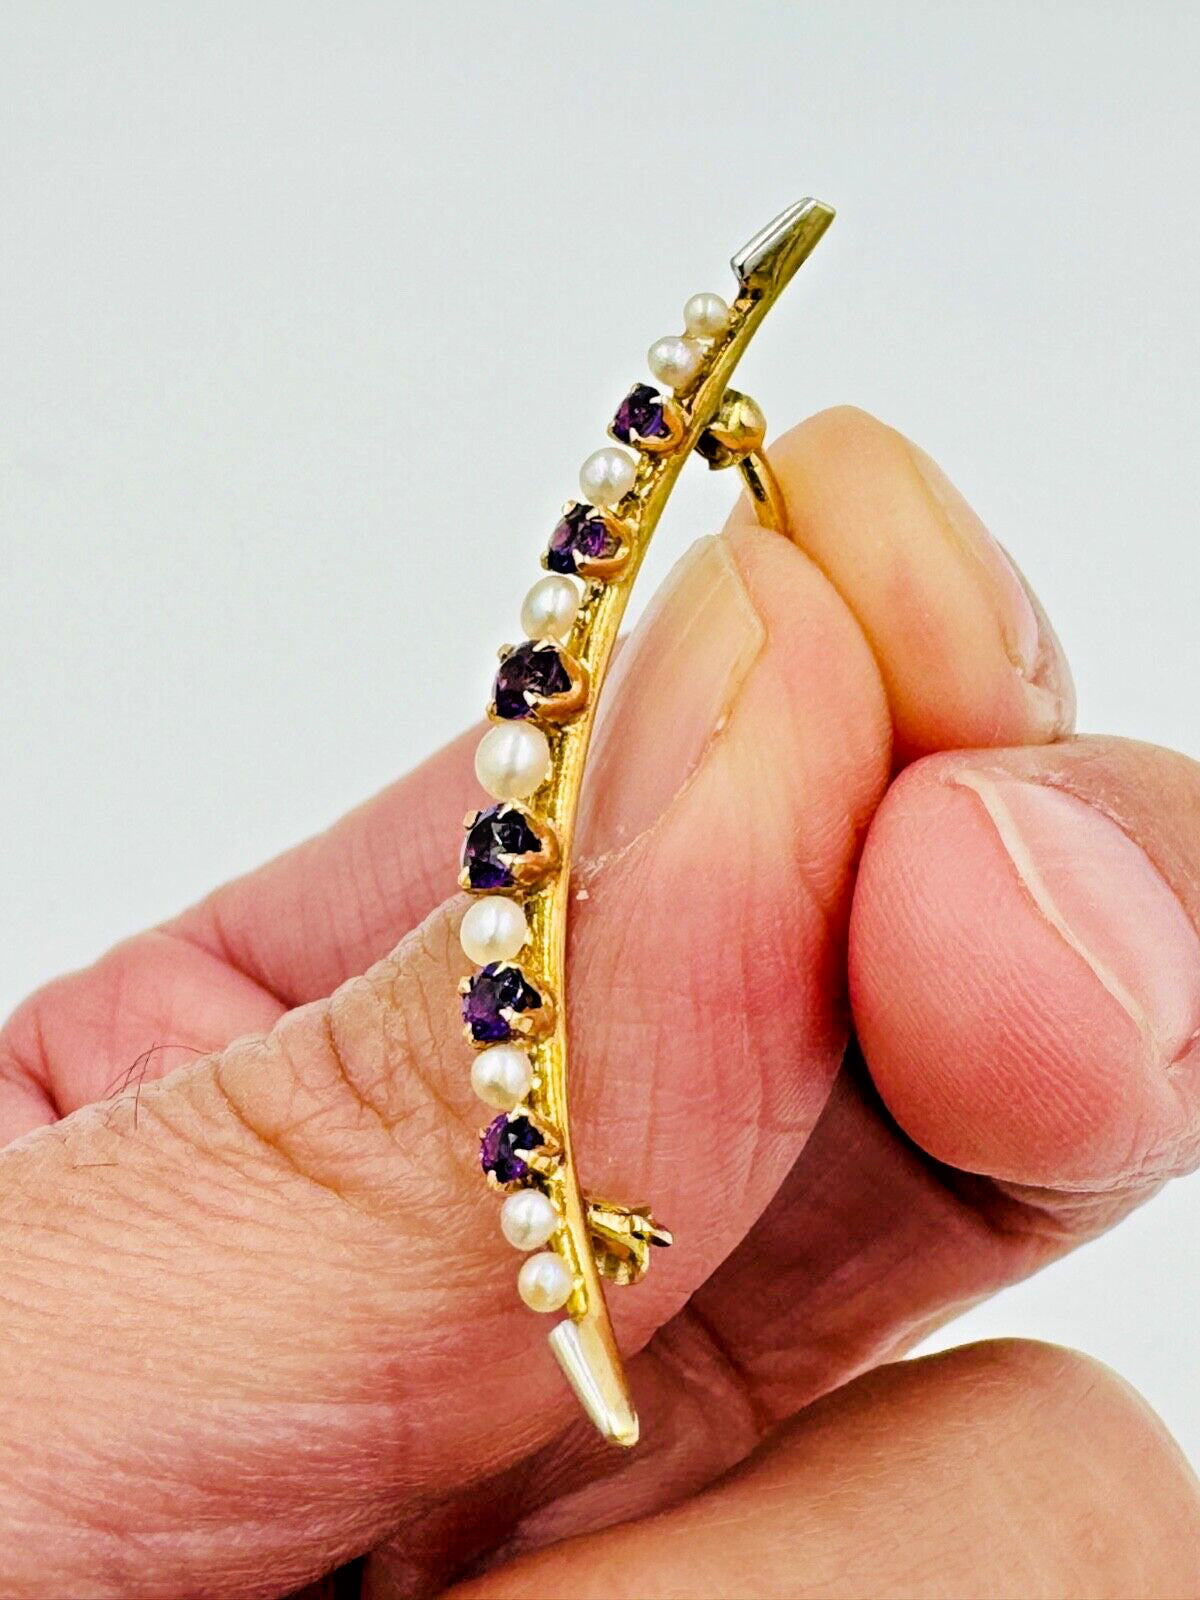 Antique 14K Yellow Gold Amethyst Pearl Pin Brooch by Bippart